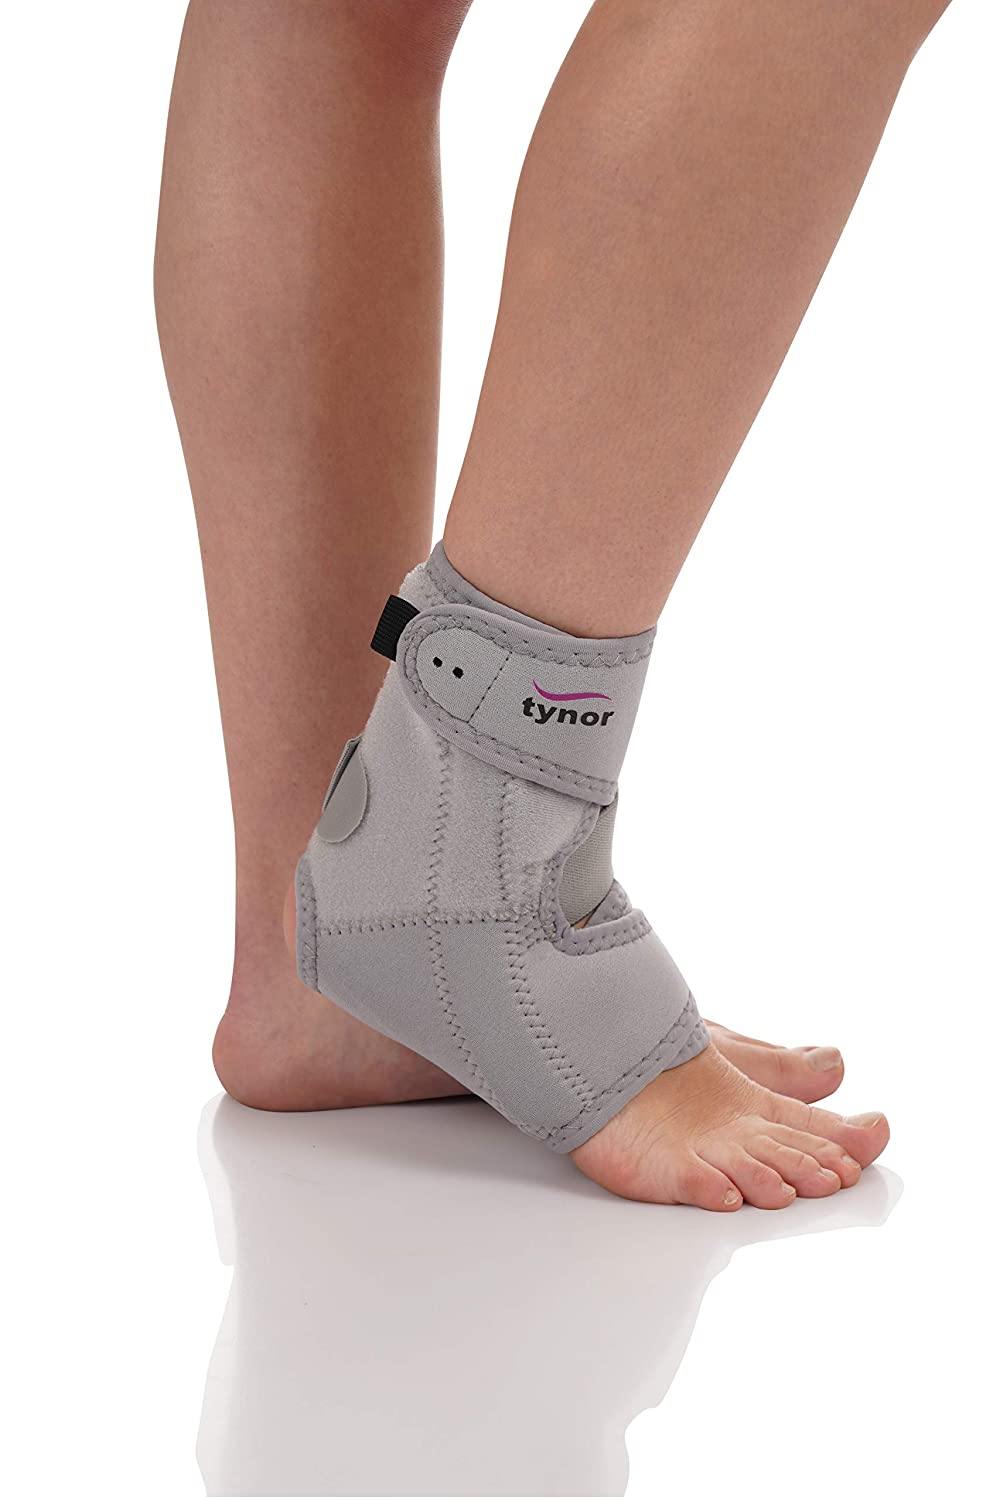 Tynor Ankle Support (Neo) Universal J-12-Health & Personal Care-dealsplant